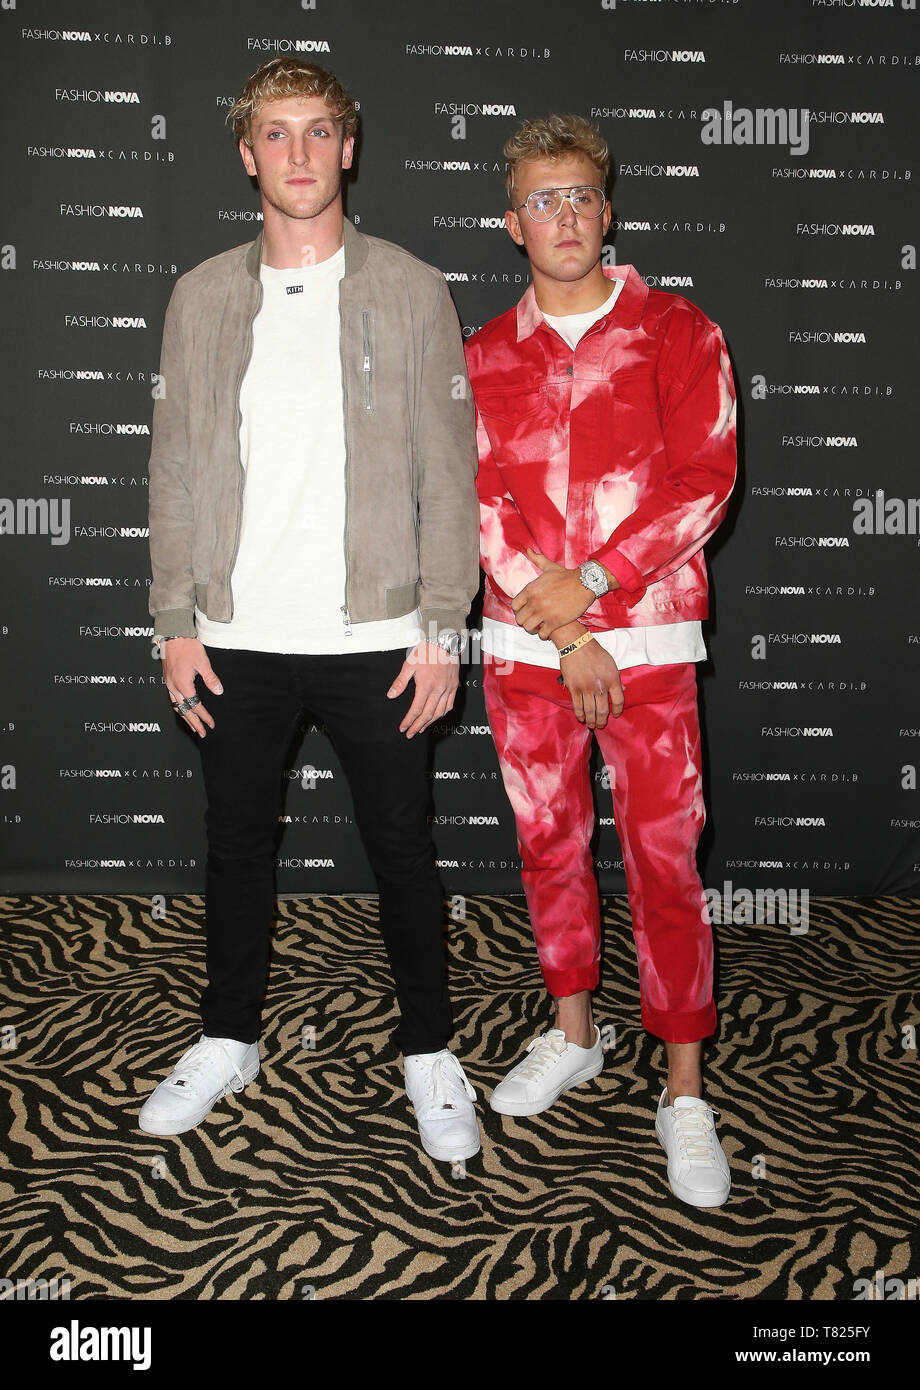 May 8, 2019 - Hollywood, California, . - 08 May 2019 - Hollywood,  California - Logan Paul and Jake Paul. Fashion Nova x Cardi B Collection  Launch Event held at the Hollywood